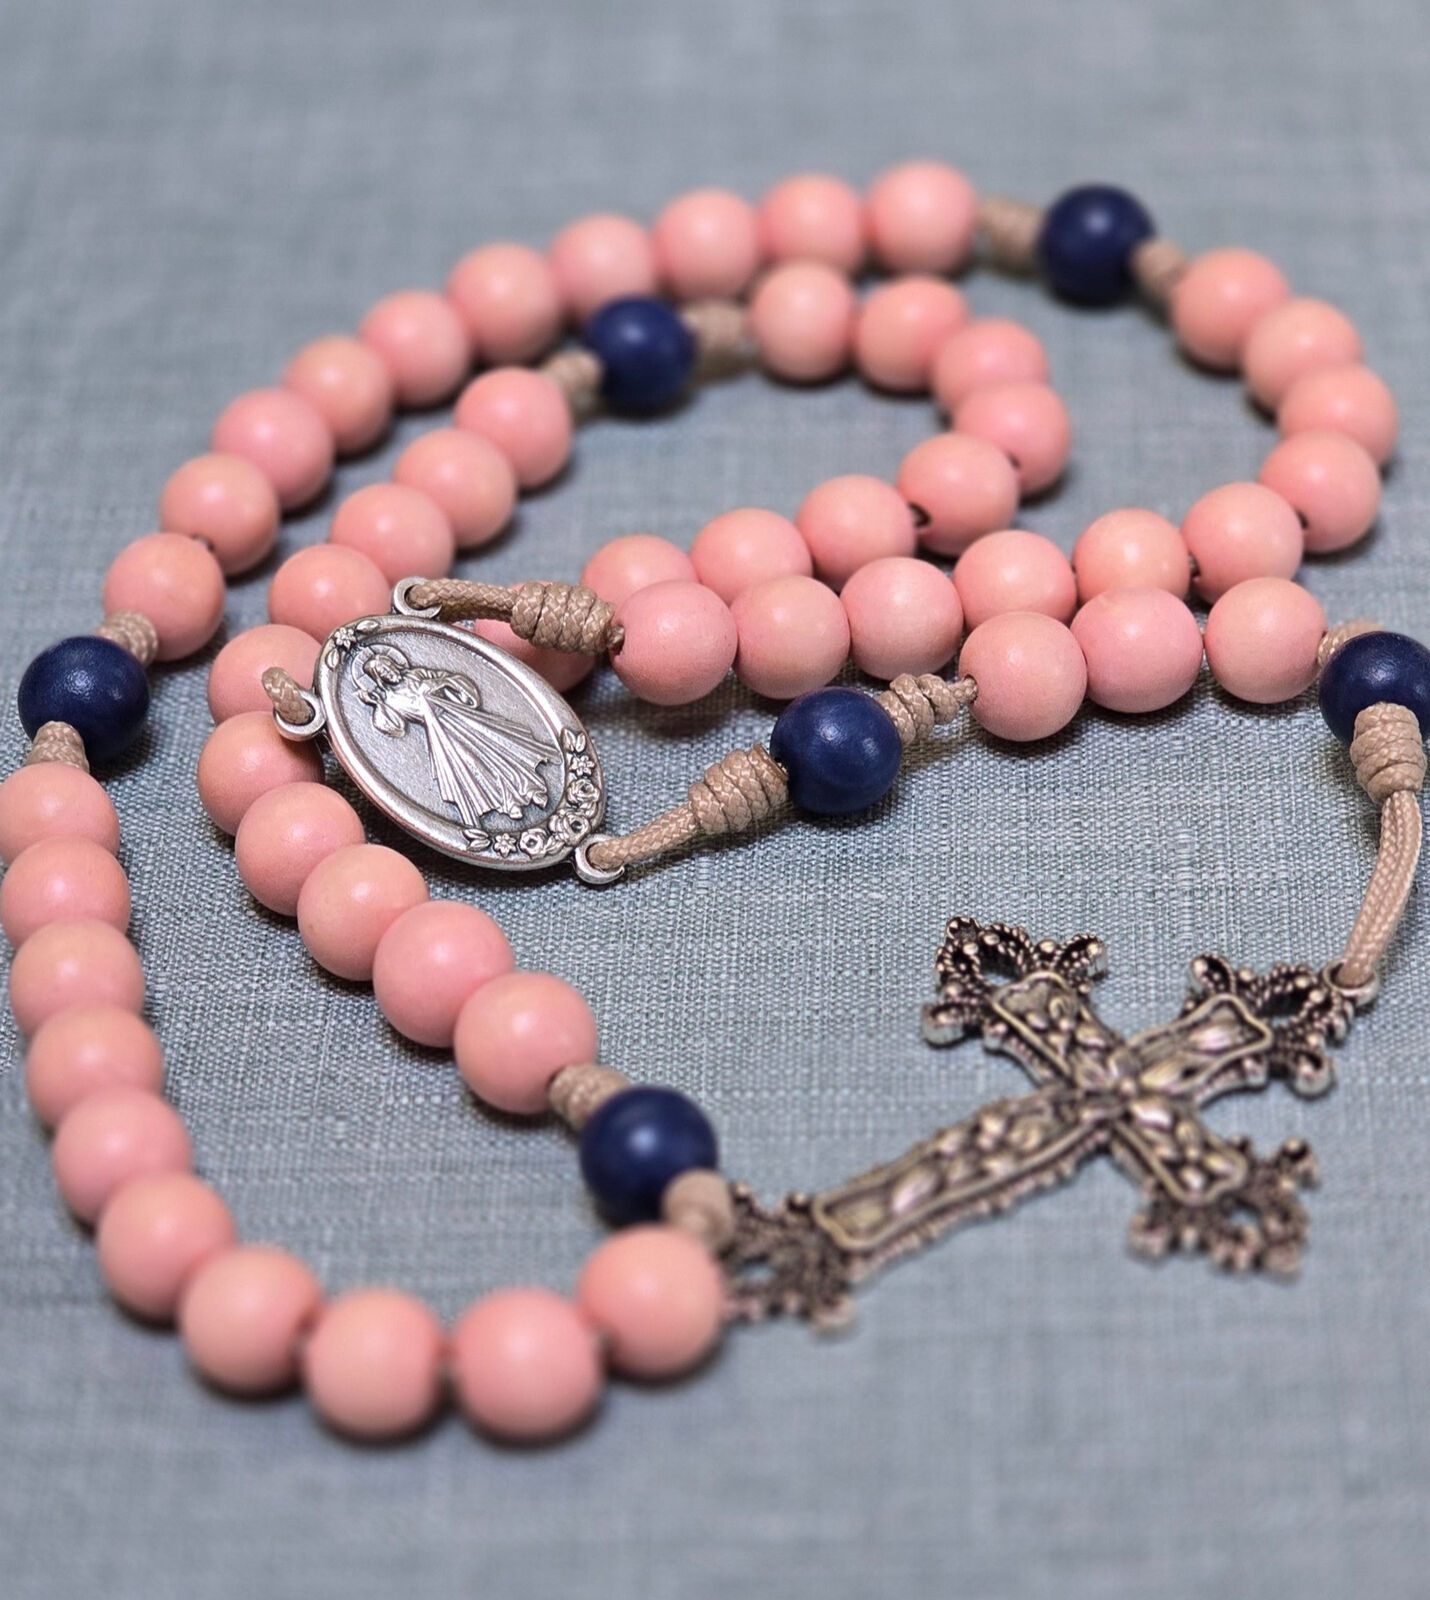 Coral Pink and Cobalt Blue Rosary with Large Fleur de Lis Cross